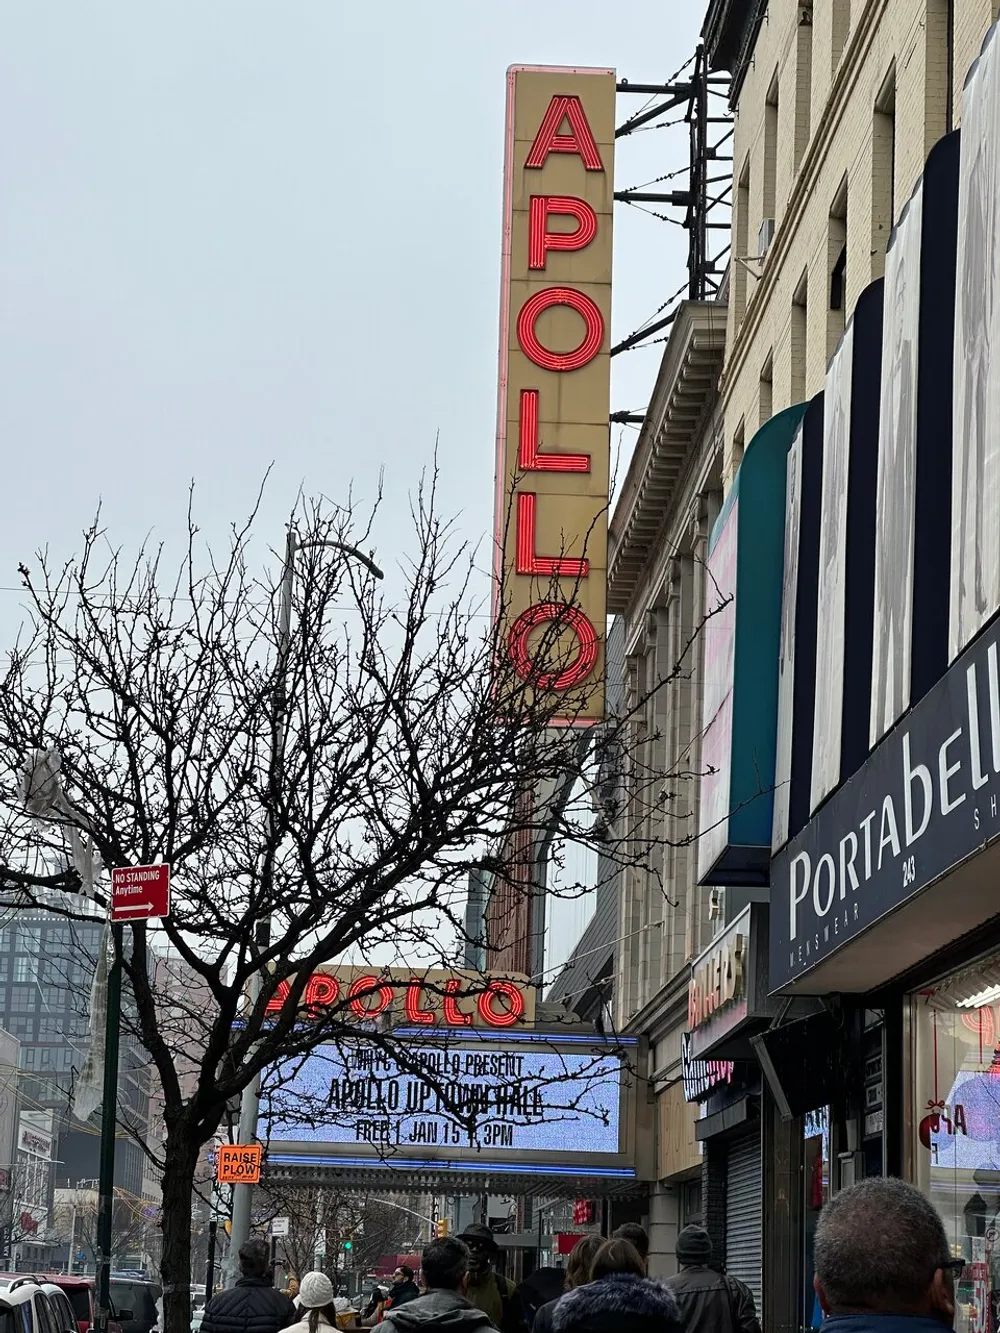 This image shows people walking by the iconic Apollo Theater marquee with neon signage in an urban setting